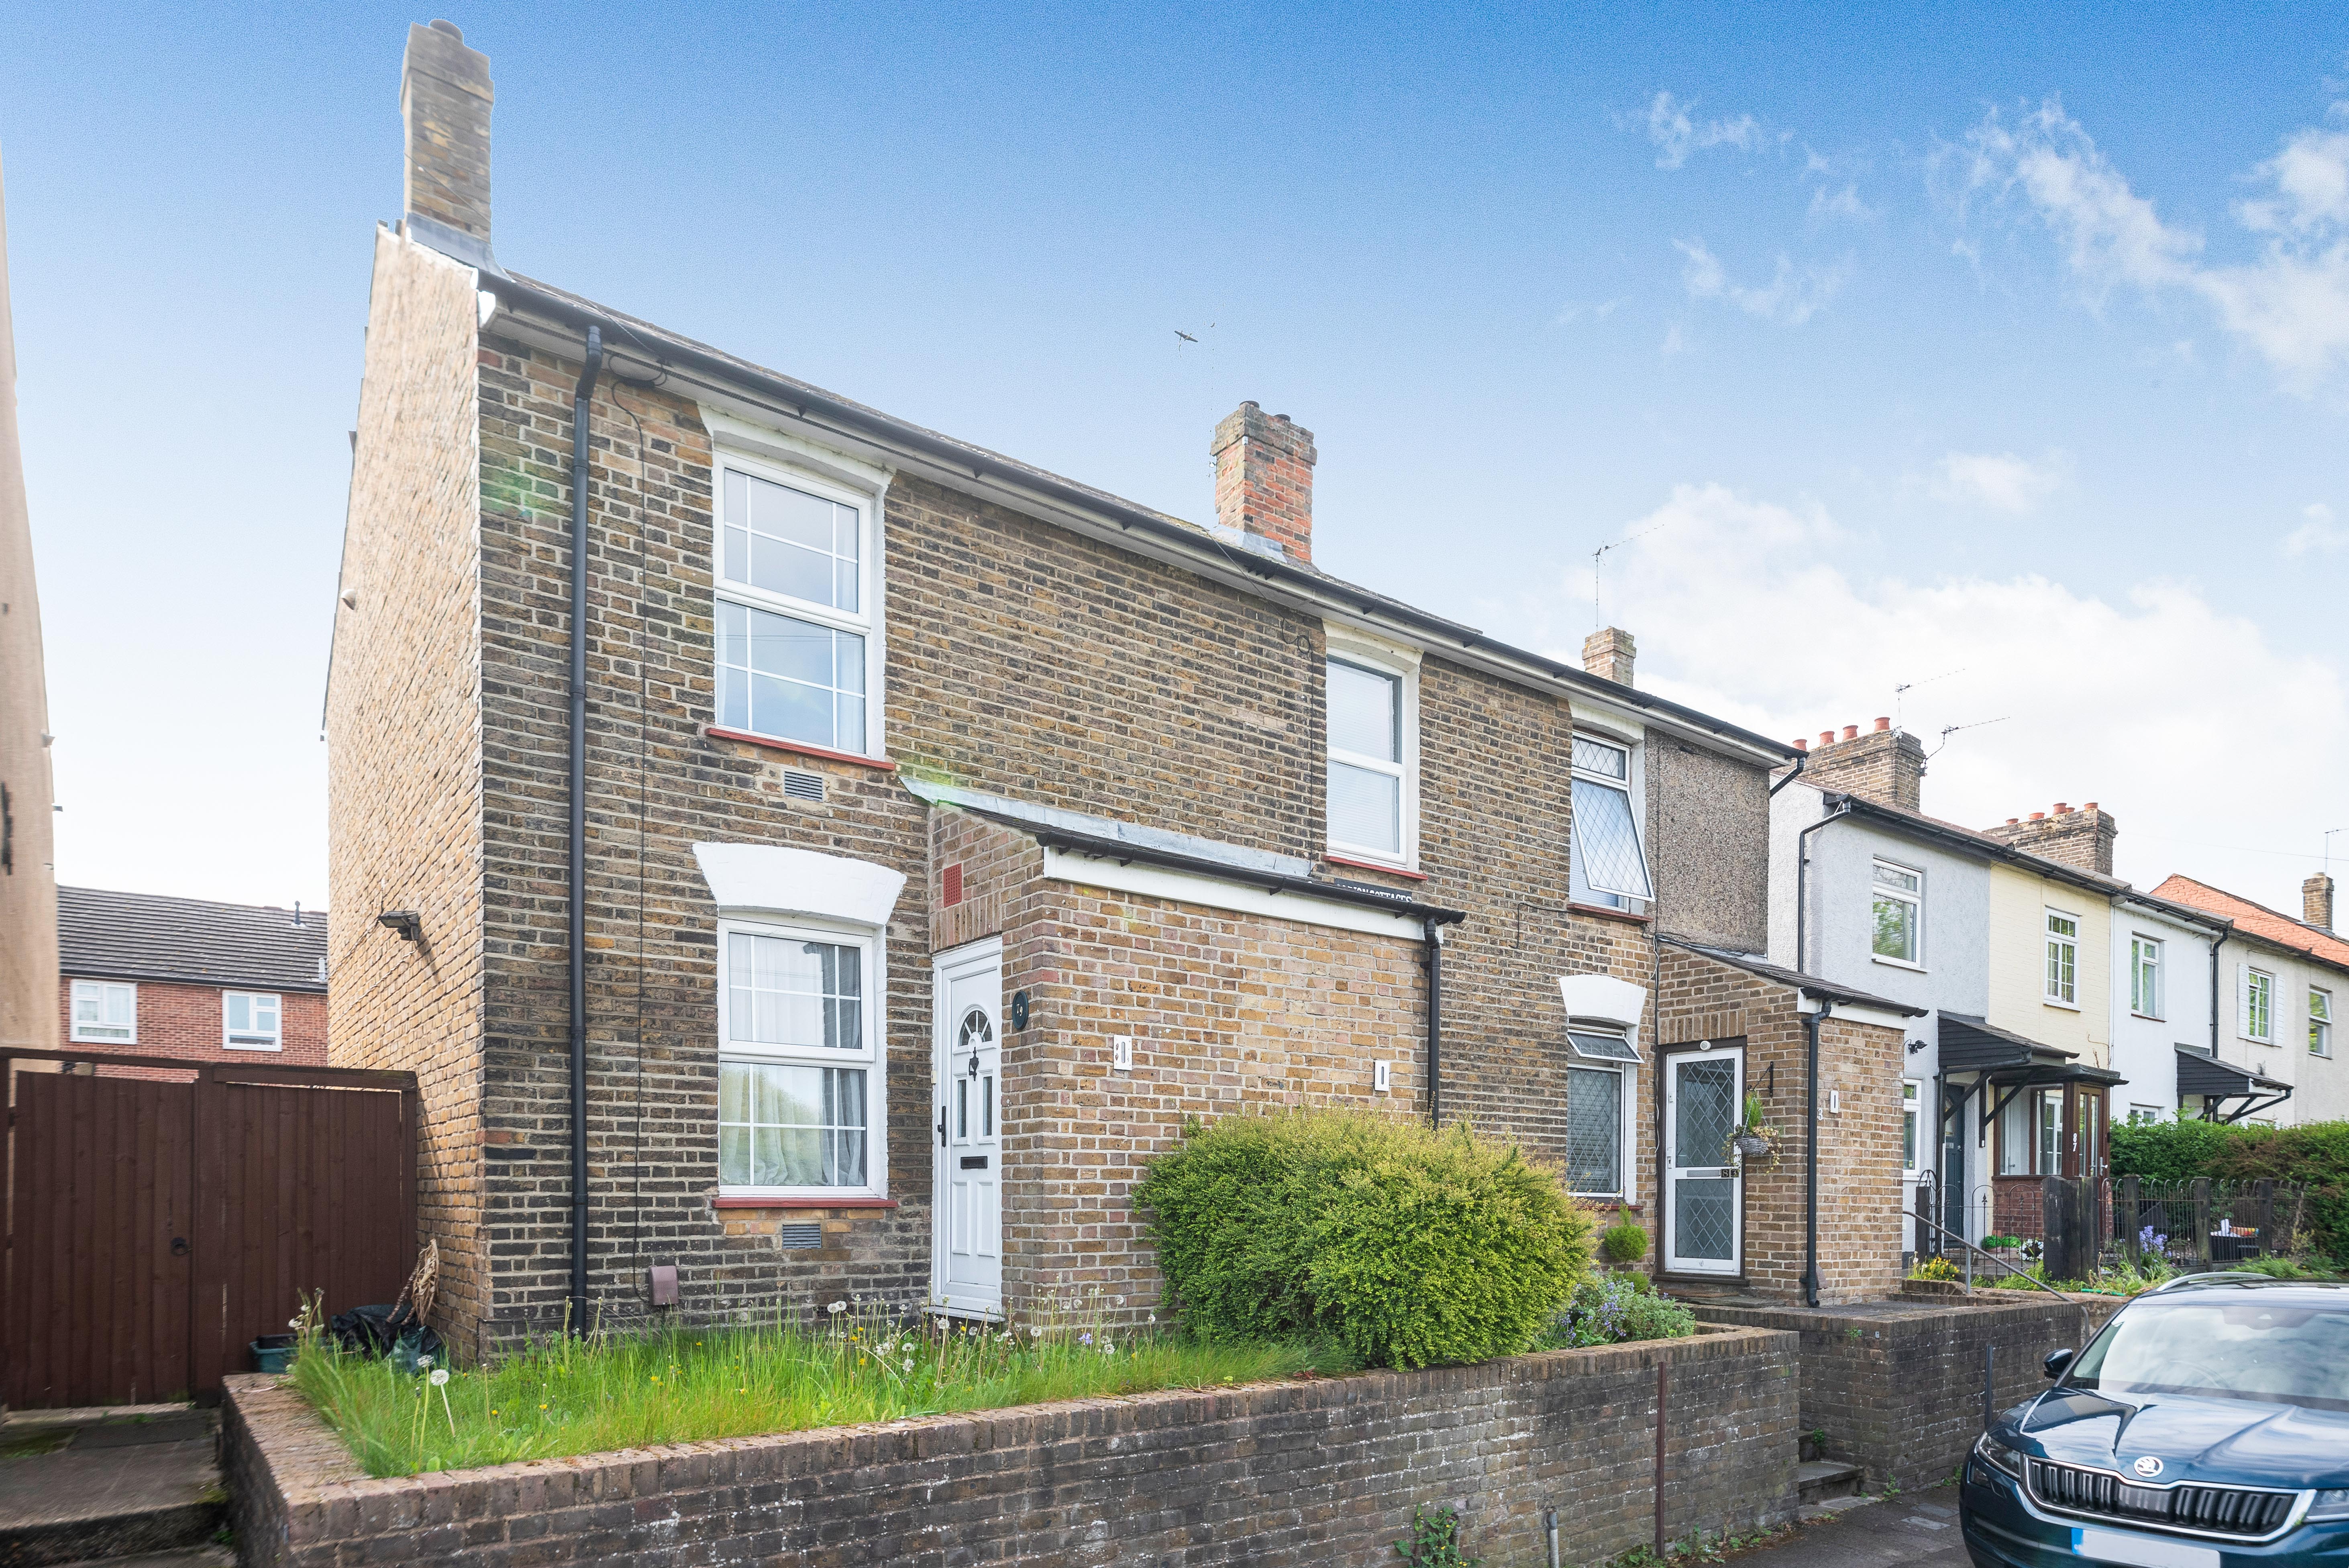 2 bed semi-detached house for sale in Lower Road, Orpington, BR5 